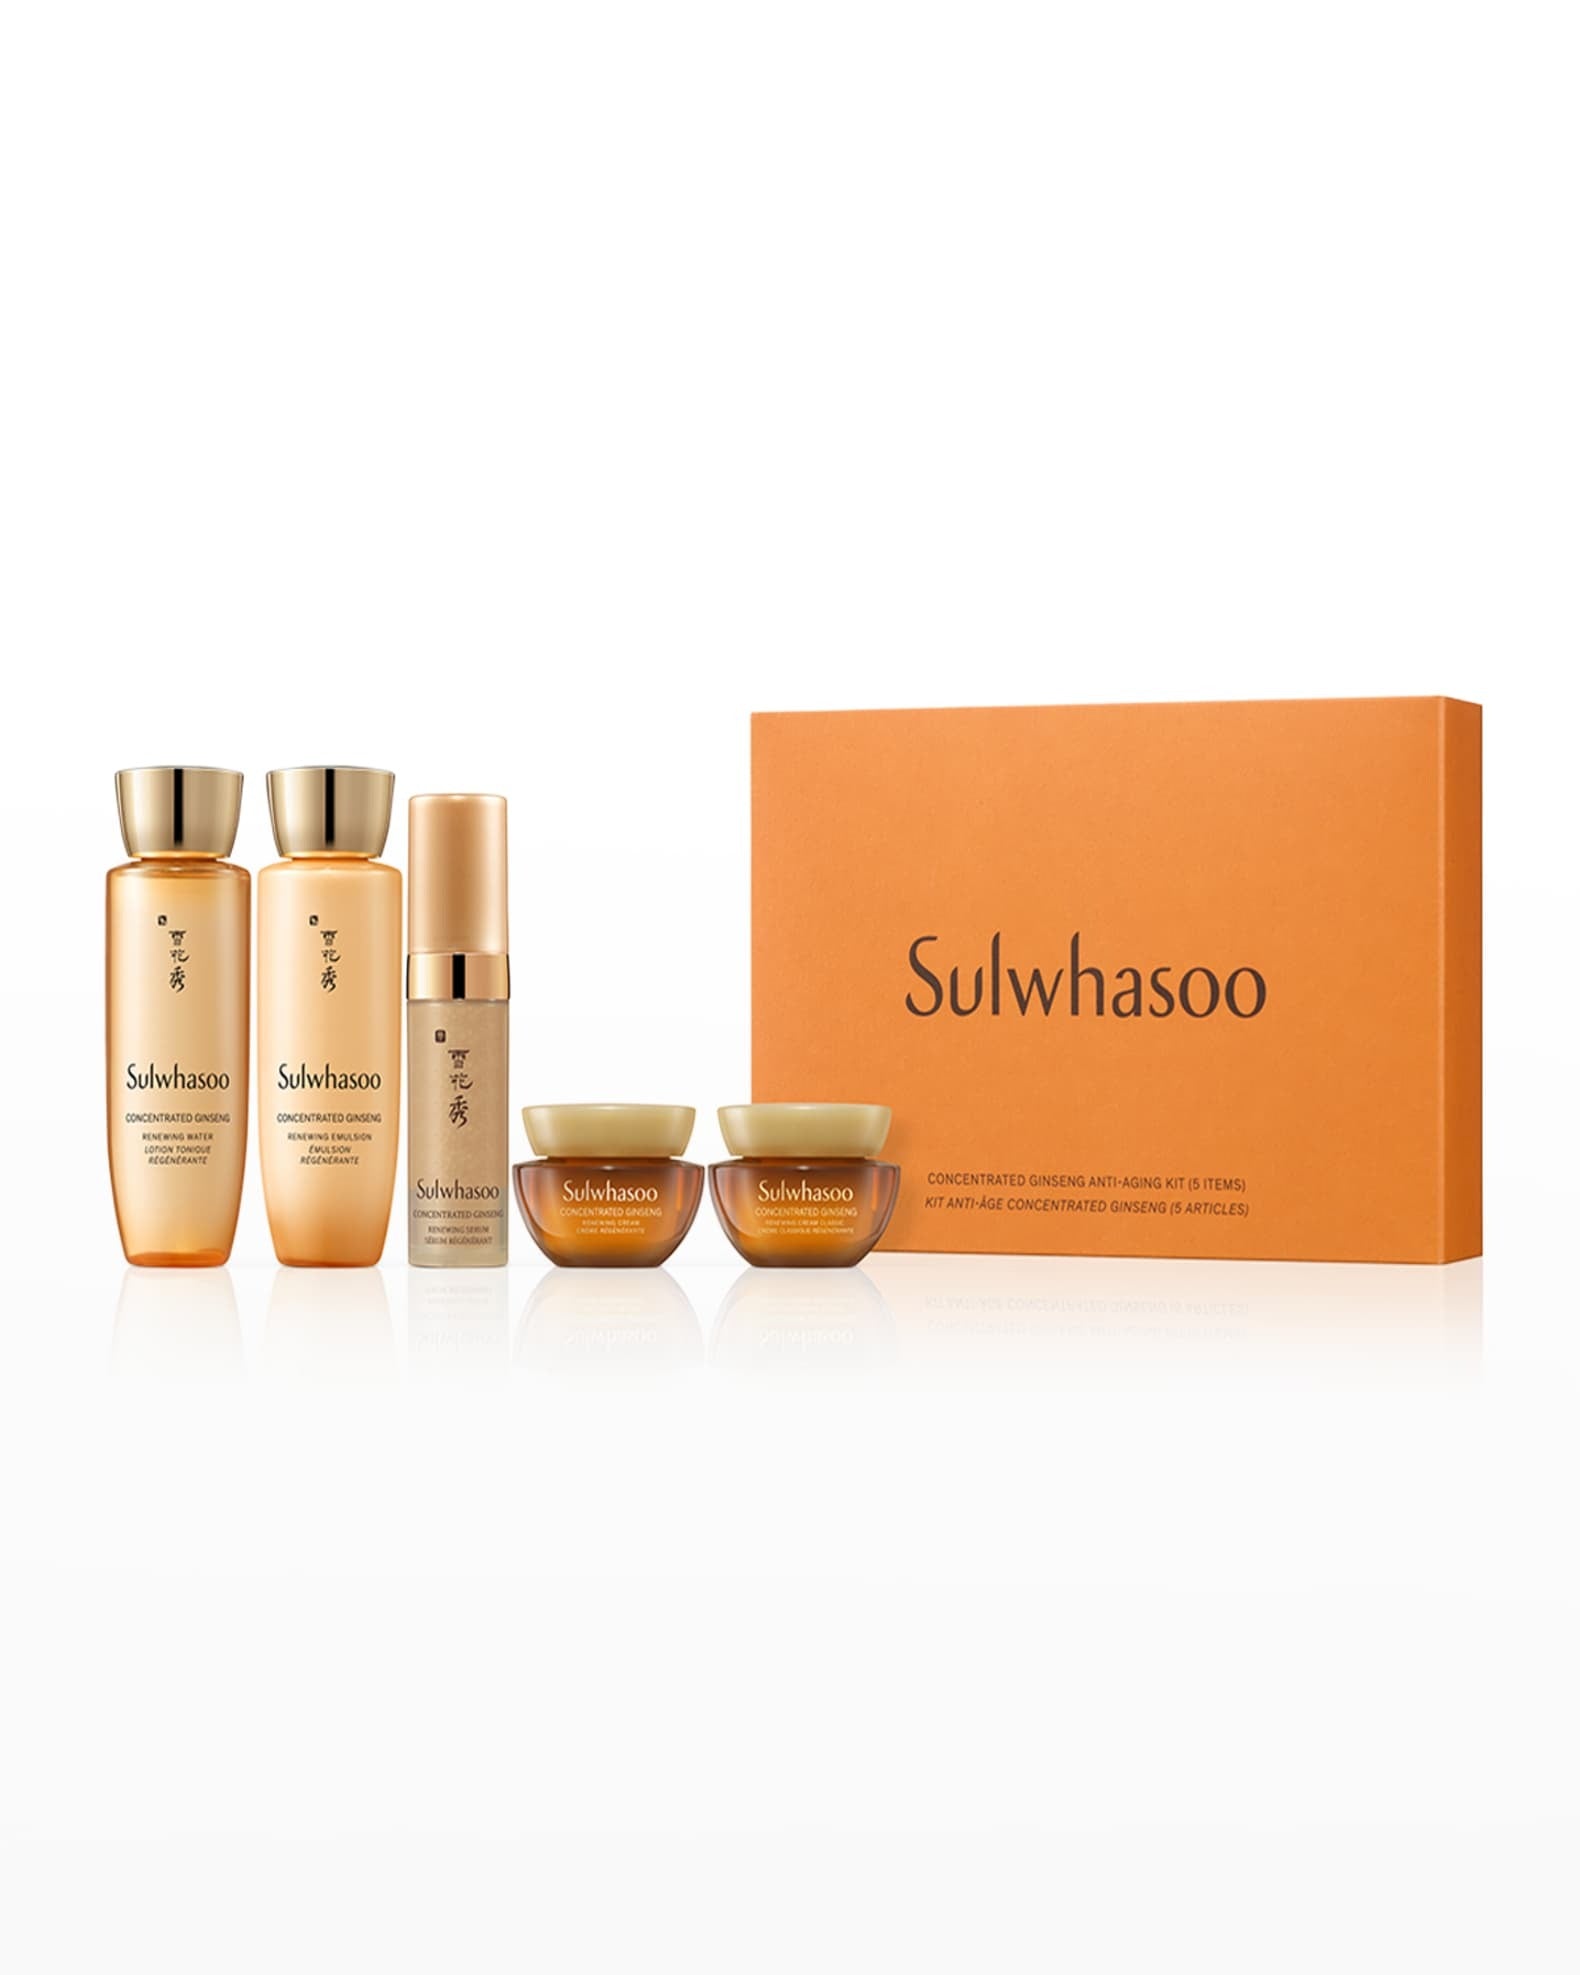 SULWHASOO Concentrated Ginseng Anti-Aging Kit (5 items)